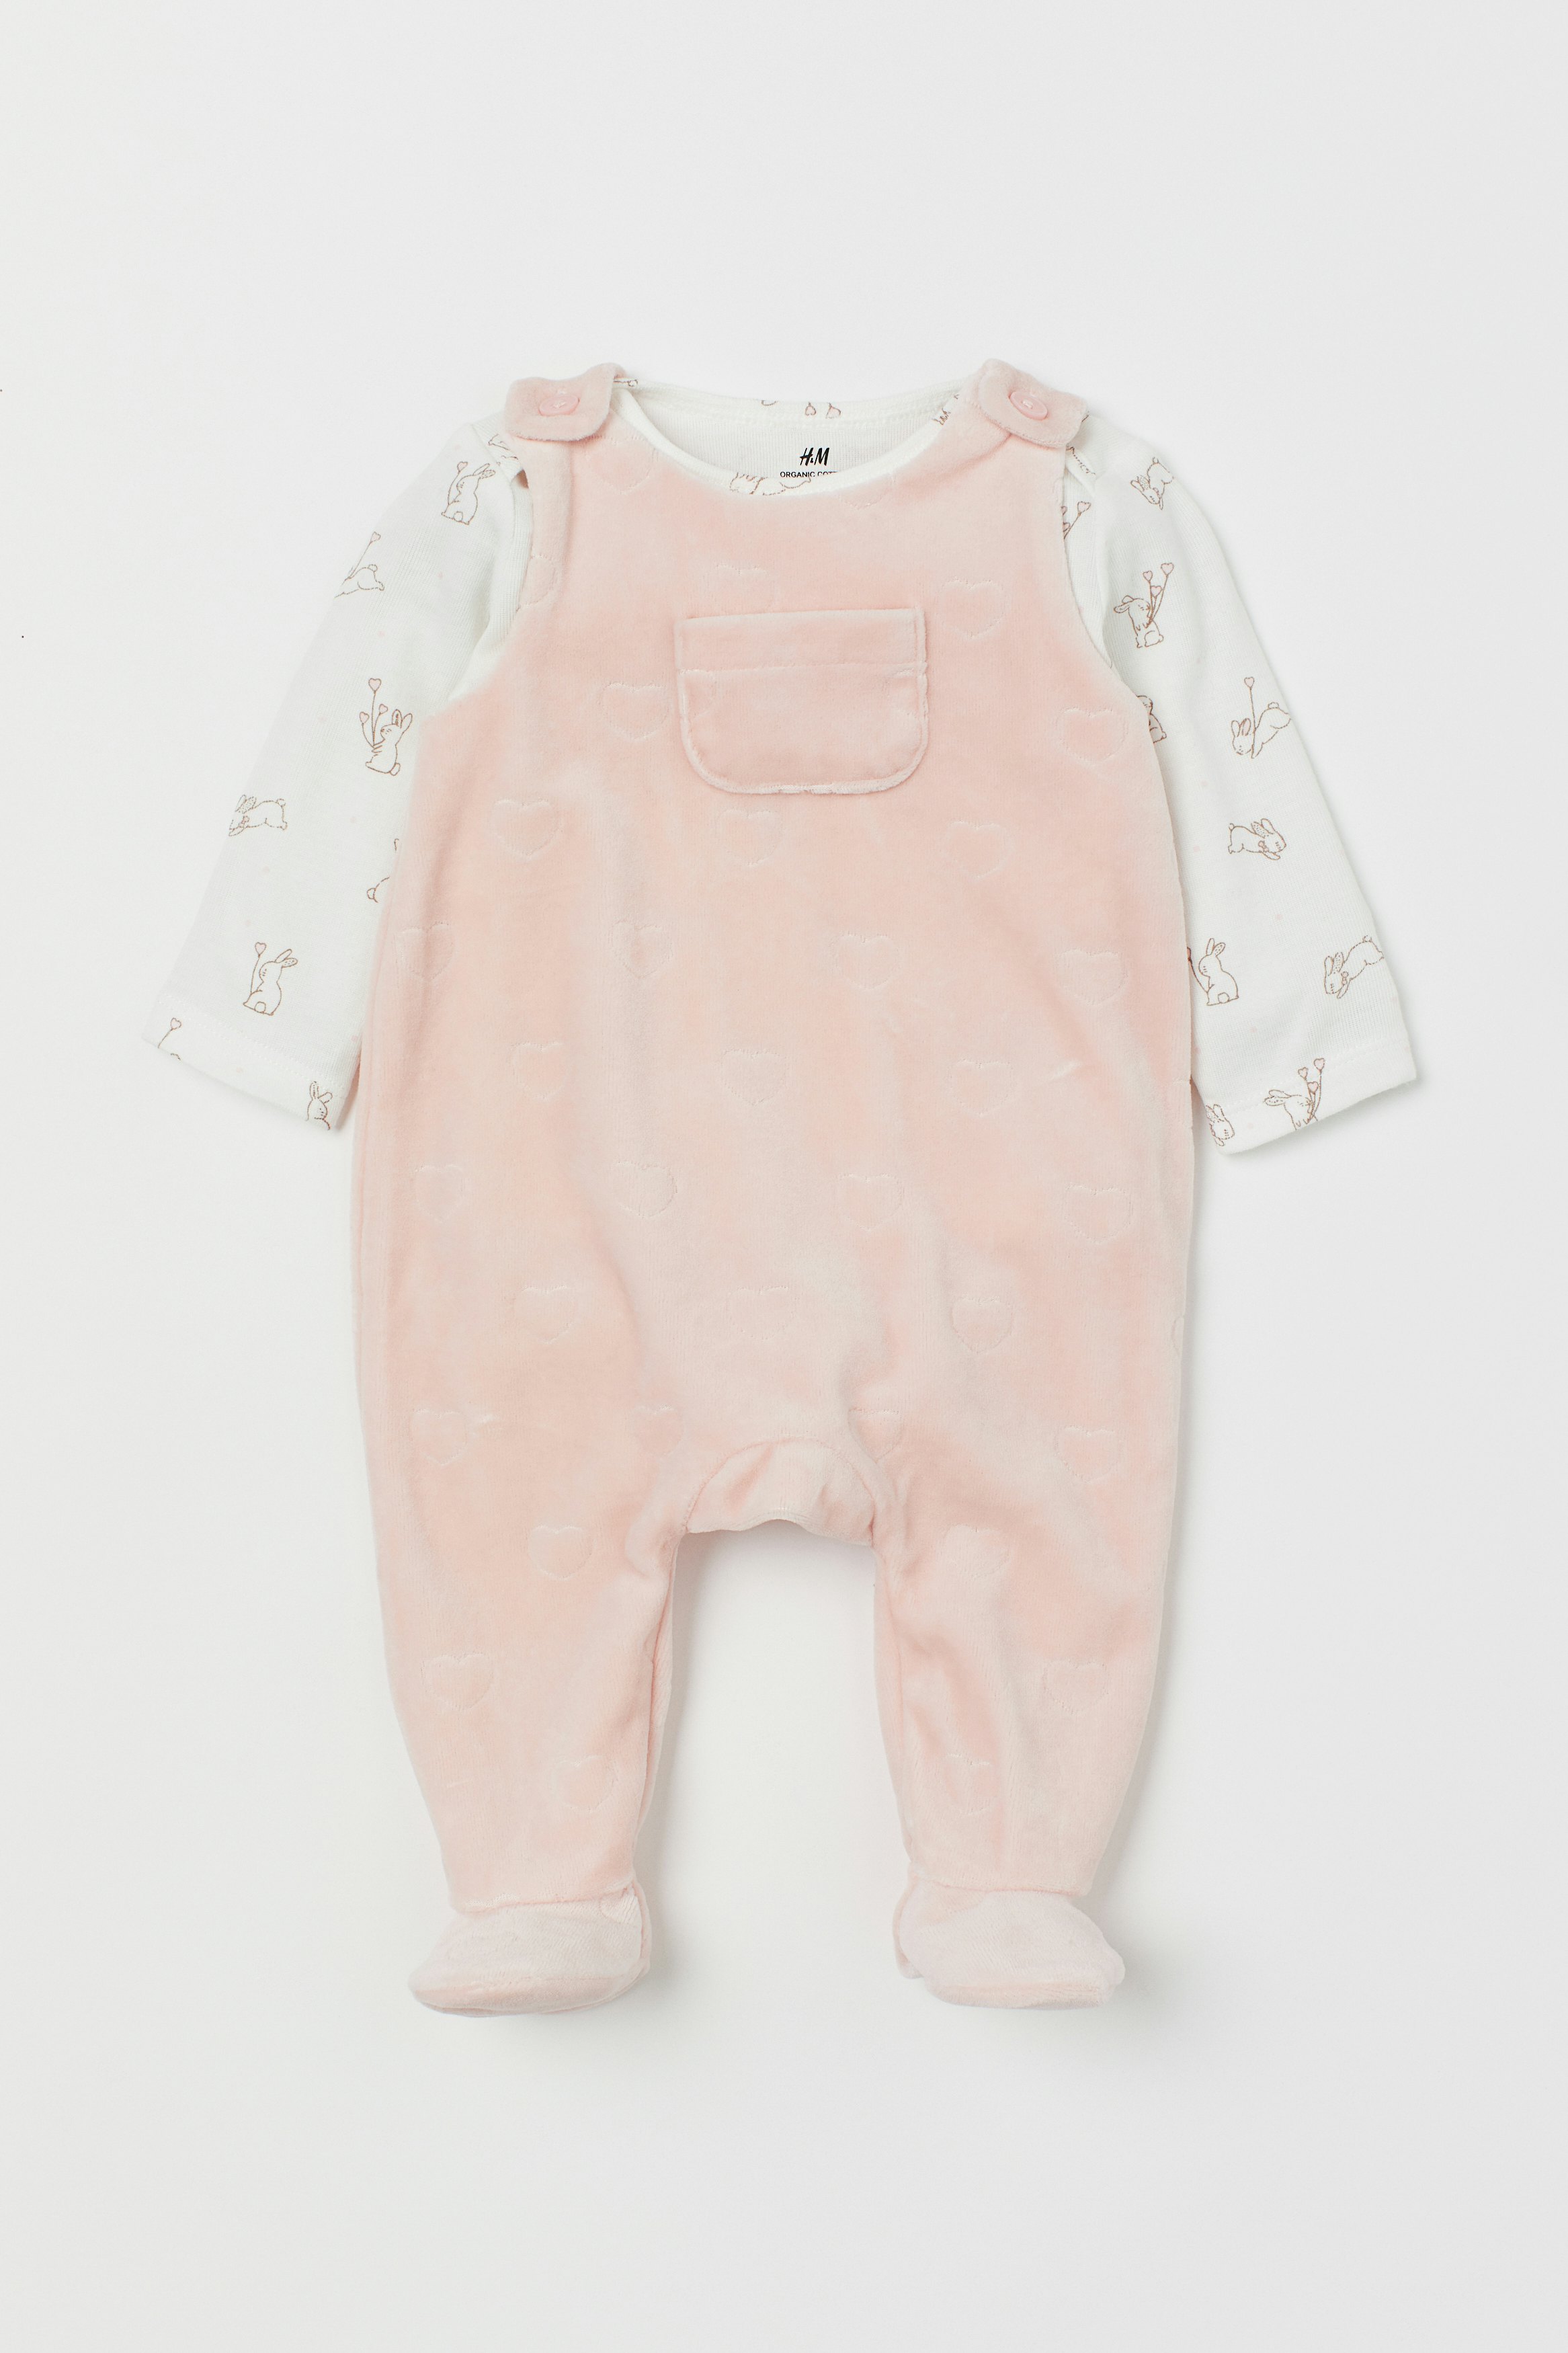 H&M says you can compost its new line of baby clothes